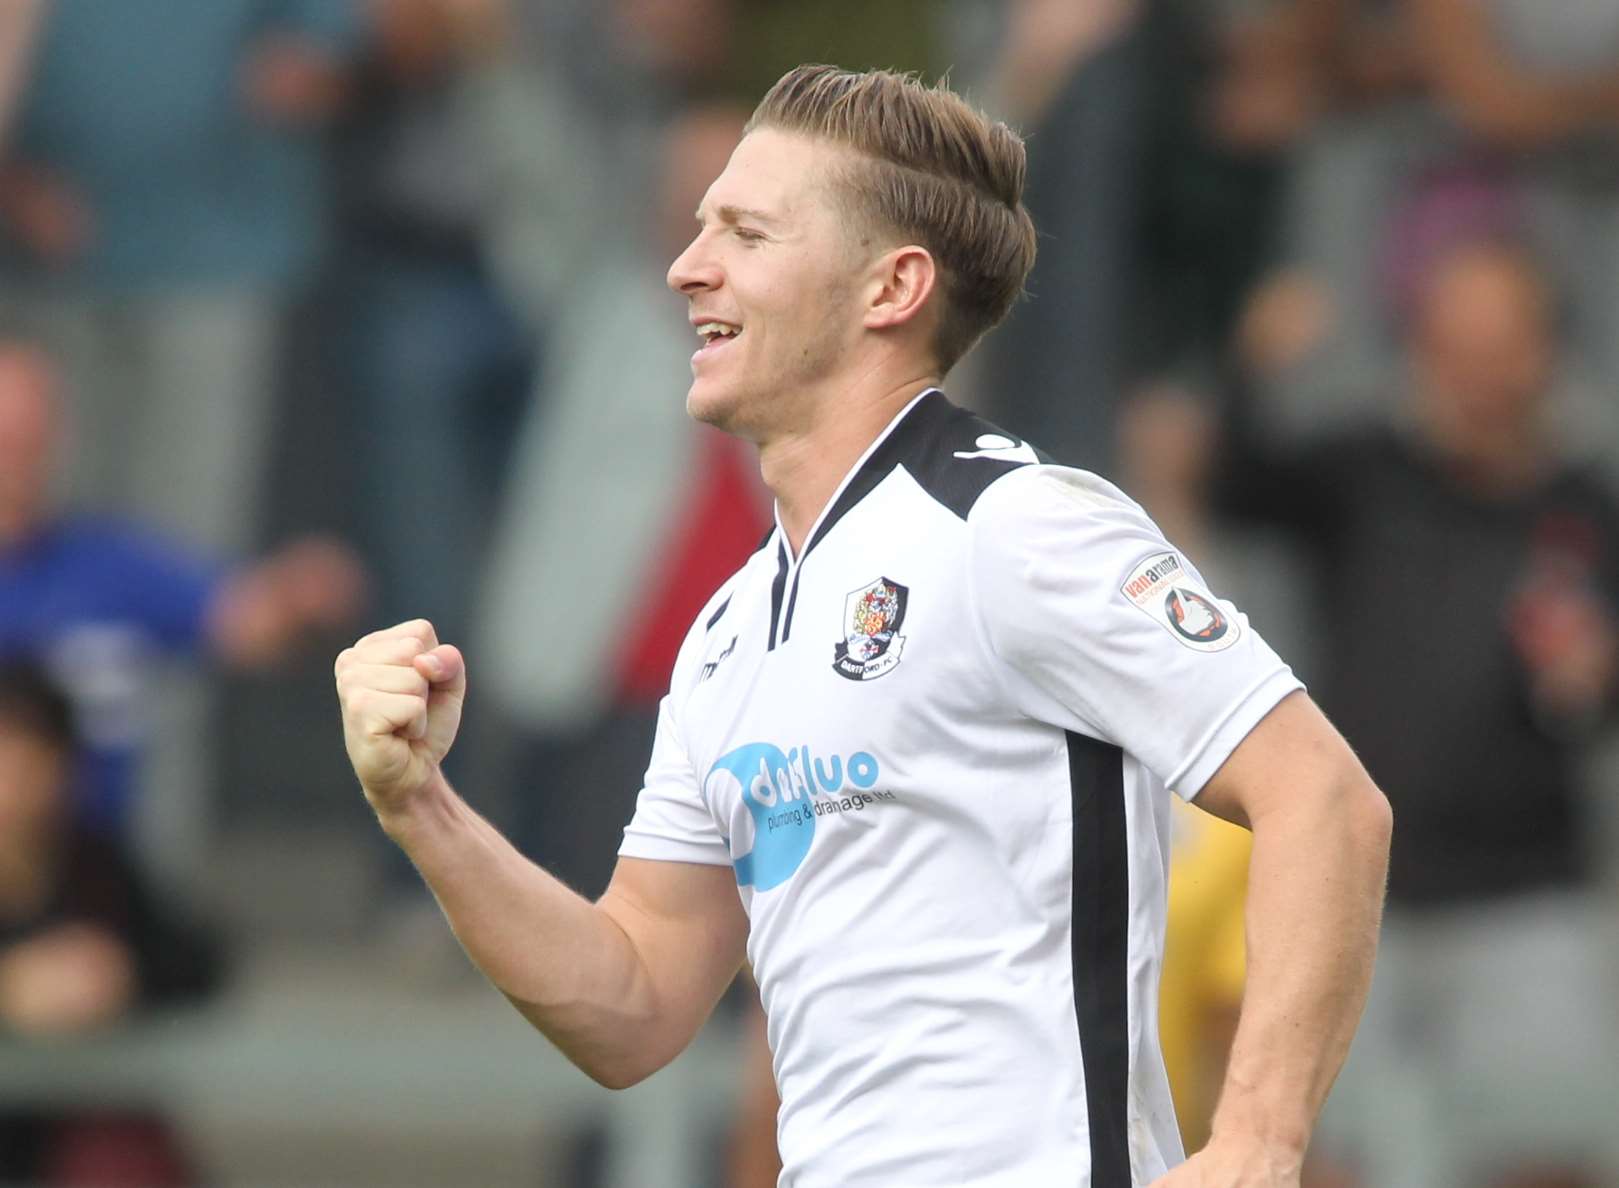 Andy Pugh scored his first goals of the season in Dartford's win at Concord Picture: John Westhrop